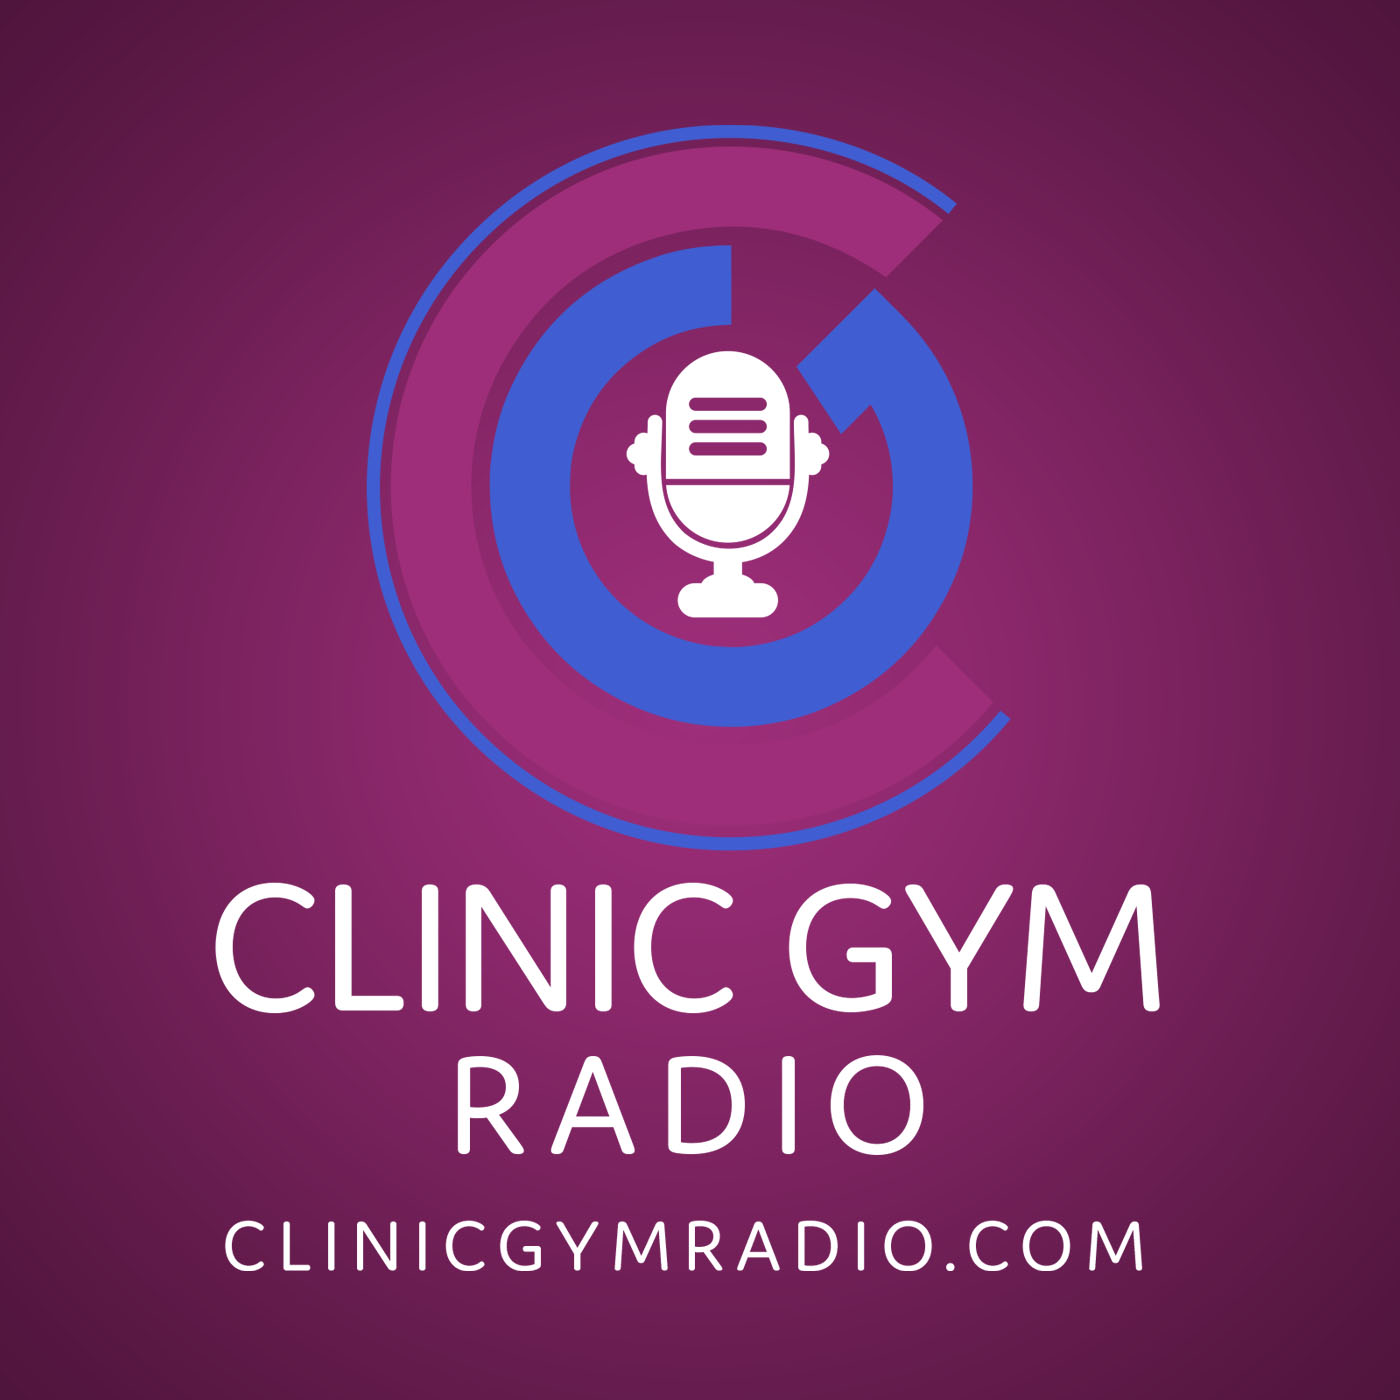 Robb Bailey Shares His Recipe for Clinic Gym Growth